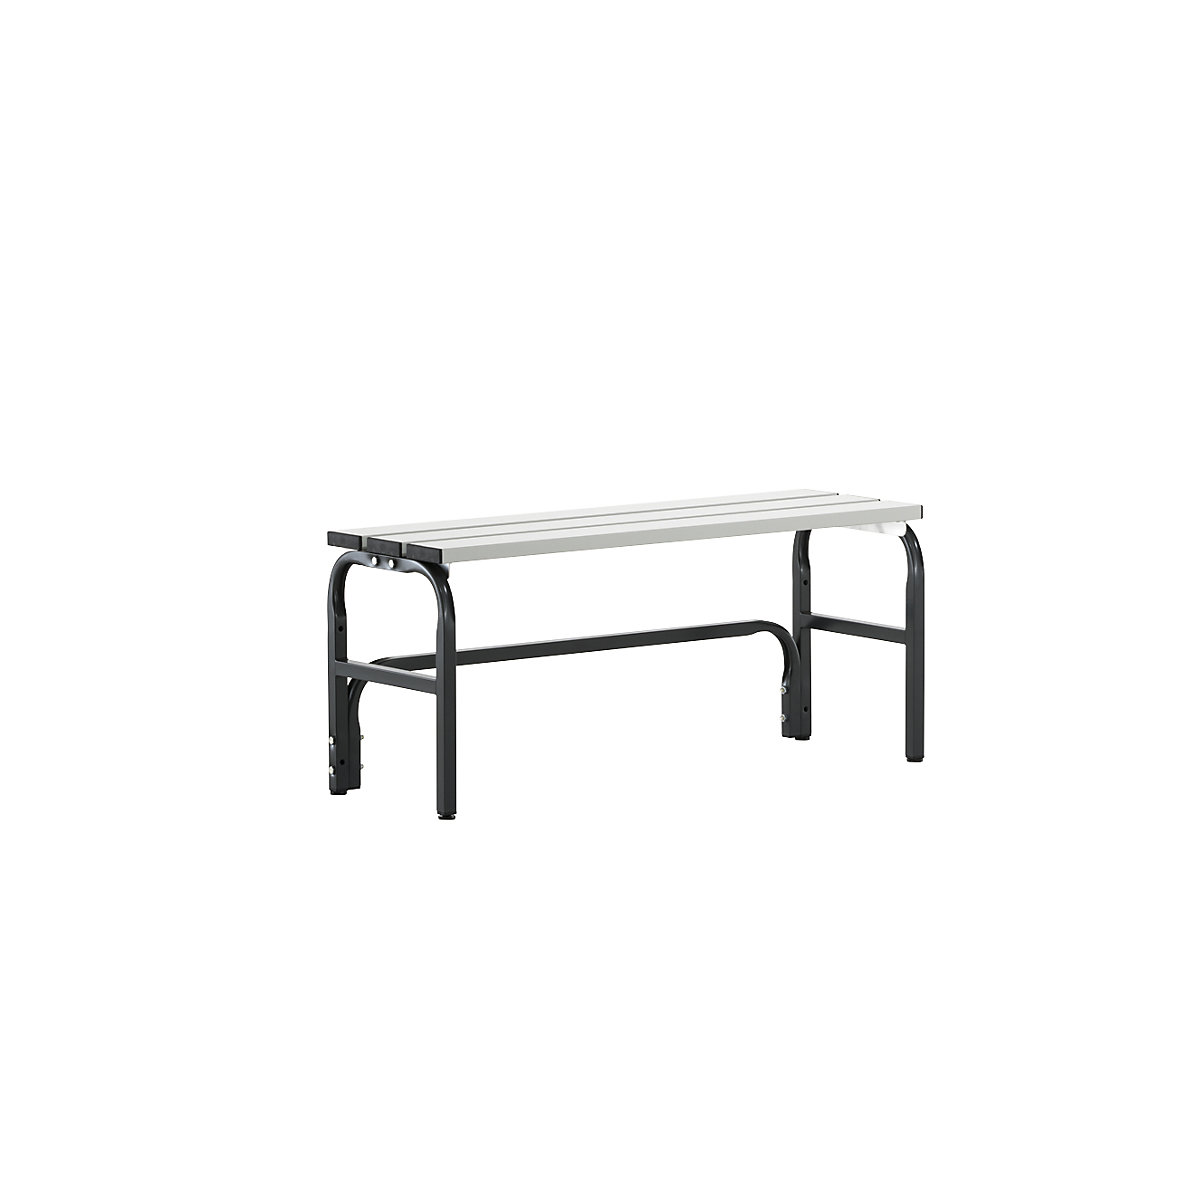 Changing room bench made of stainless steel – Sypro